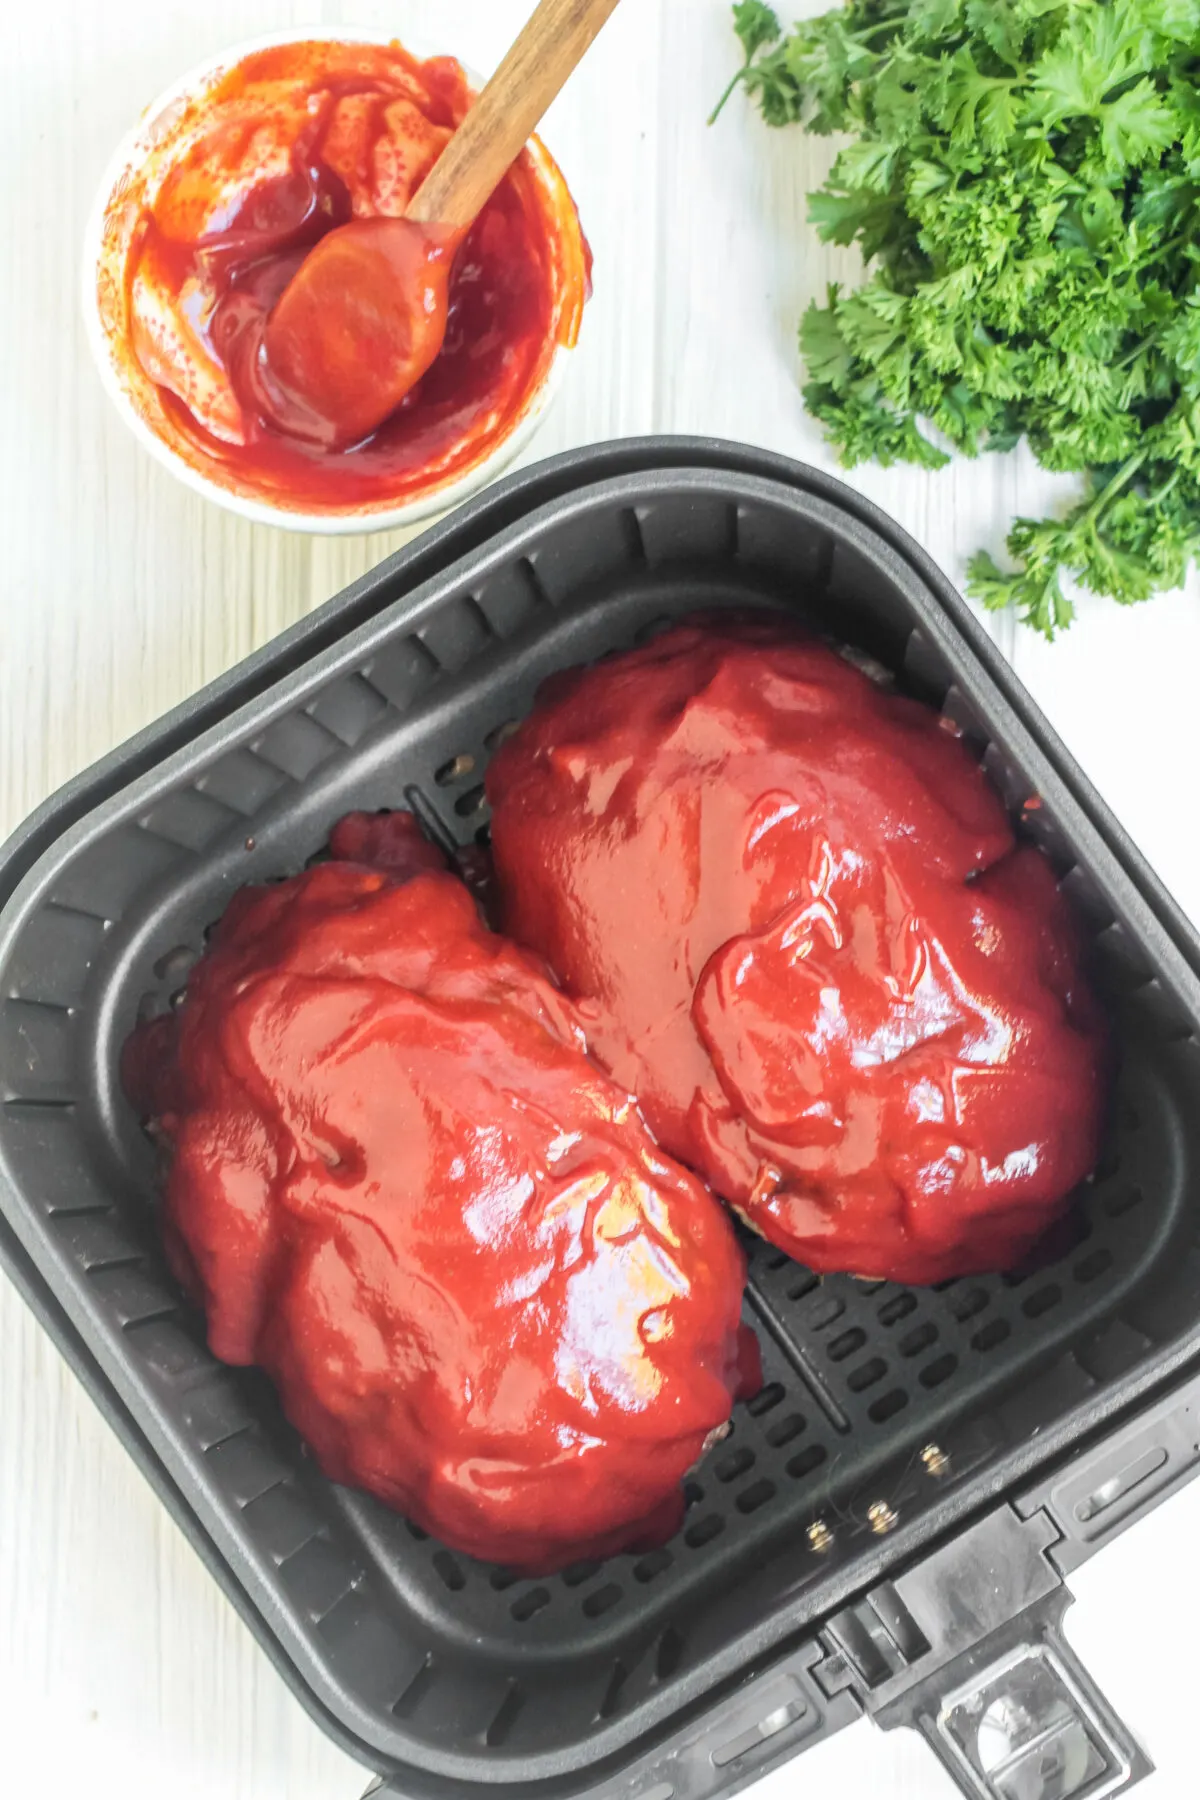 Meatloaves covered generously in the glaze.